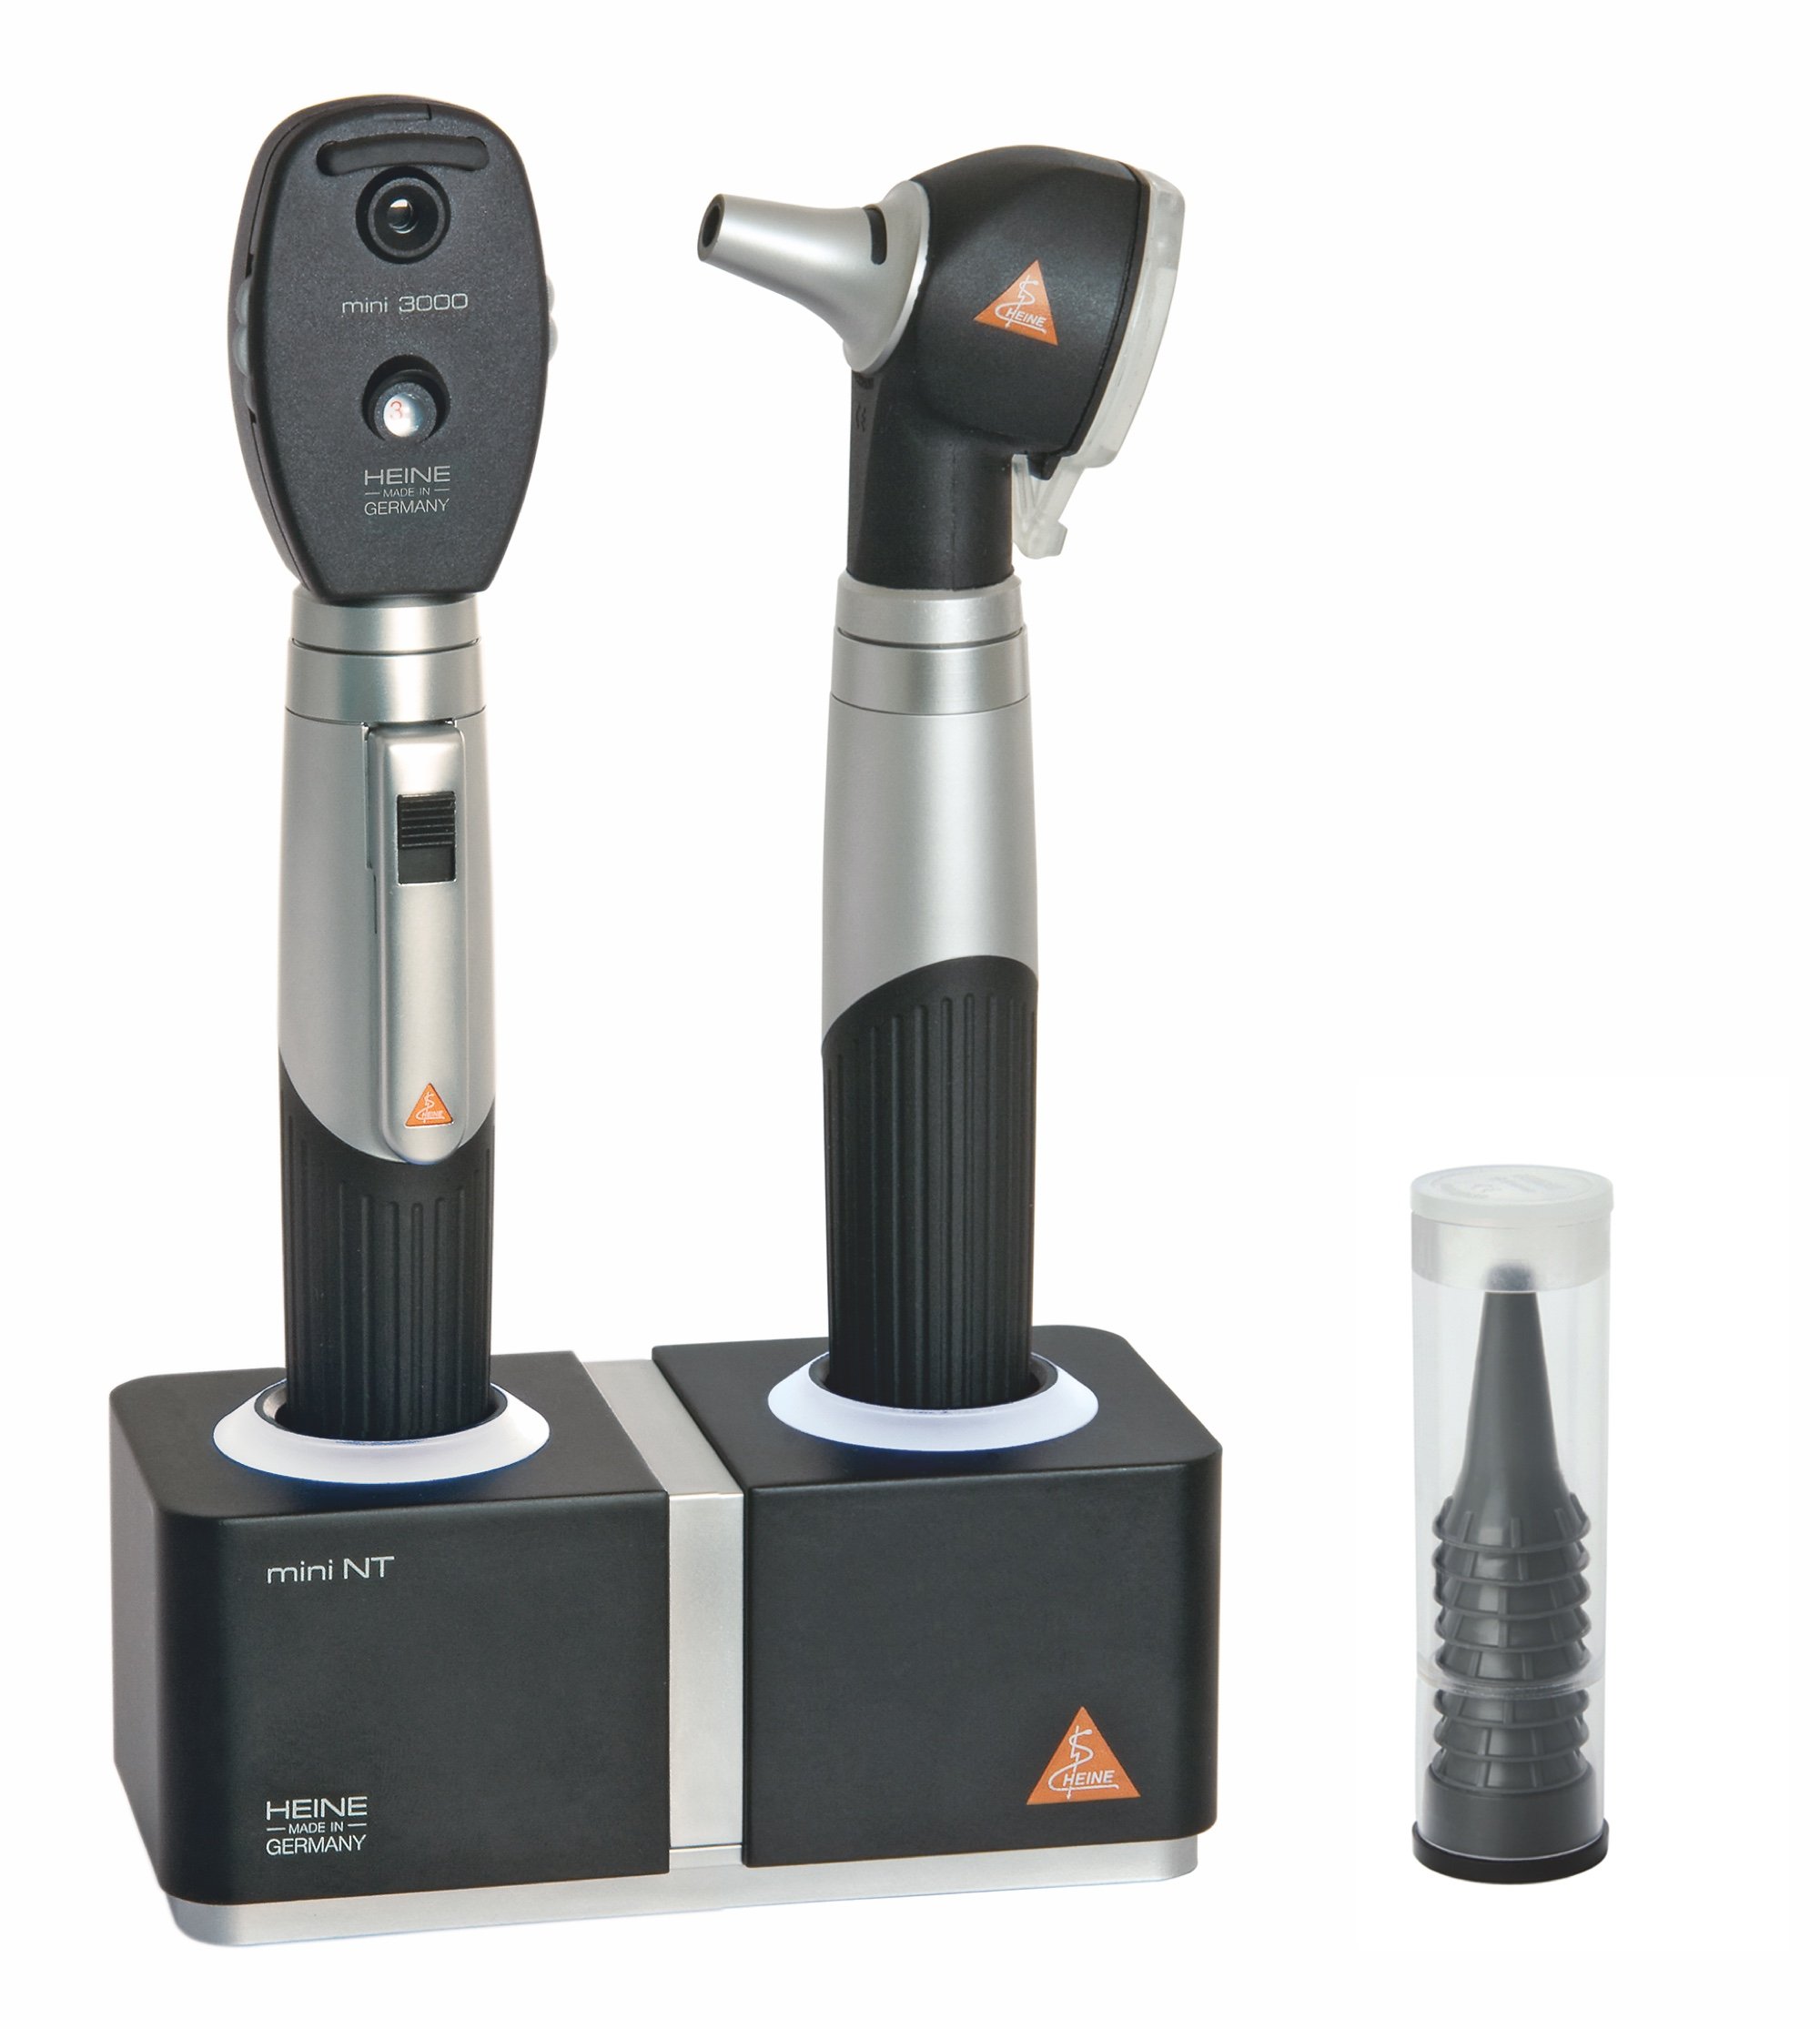 HEINE mini3000 F.O Otoscope/Ophthalmoscope Set with MiniNT Charger